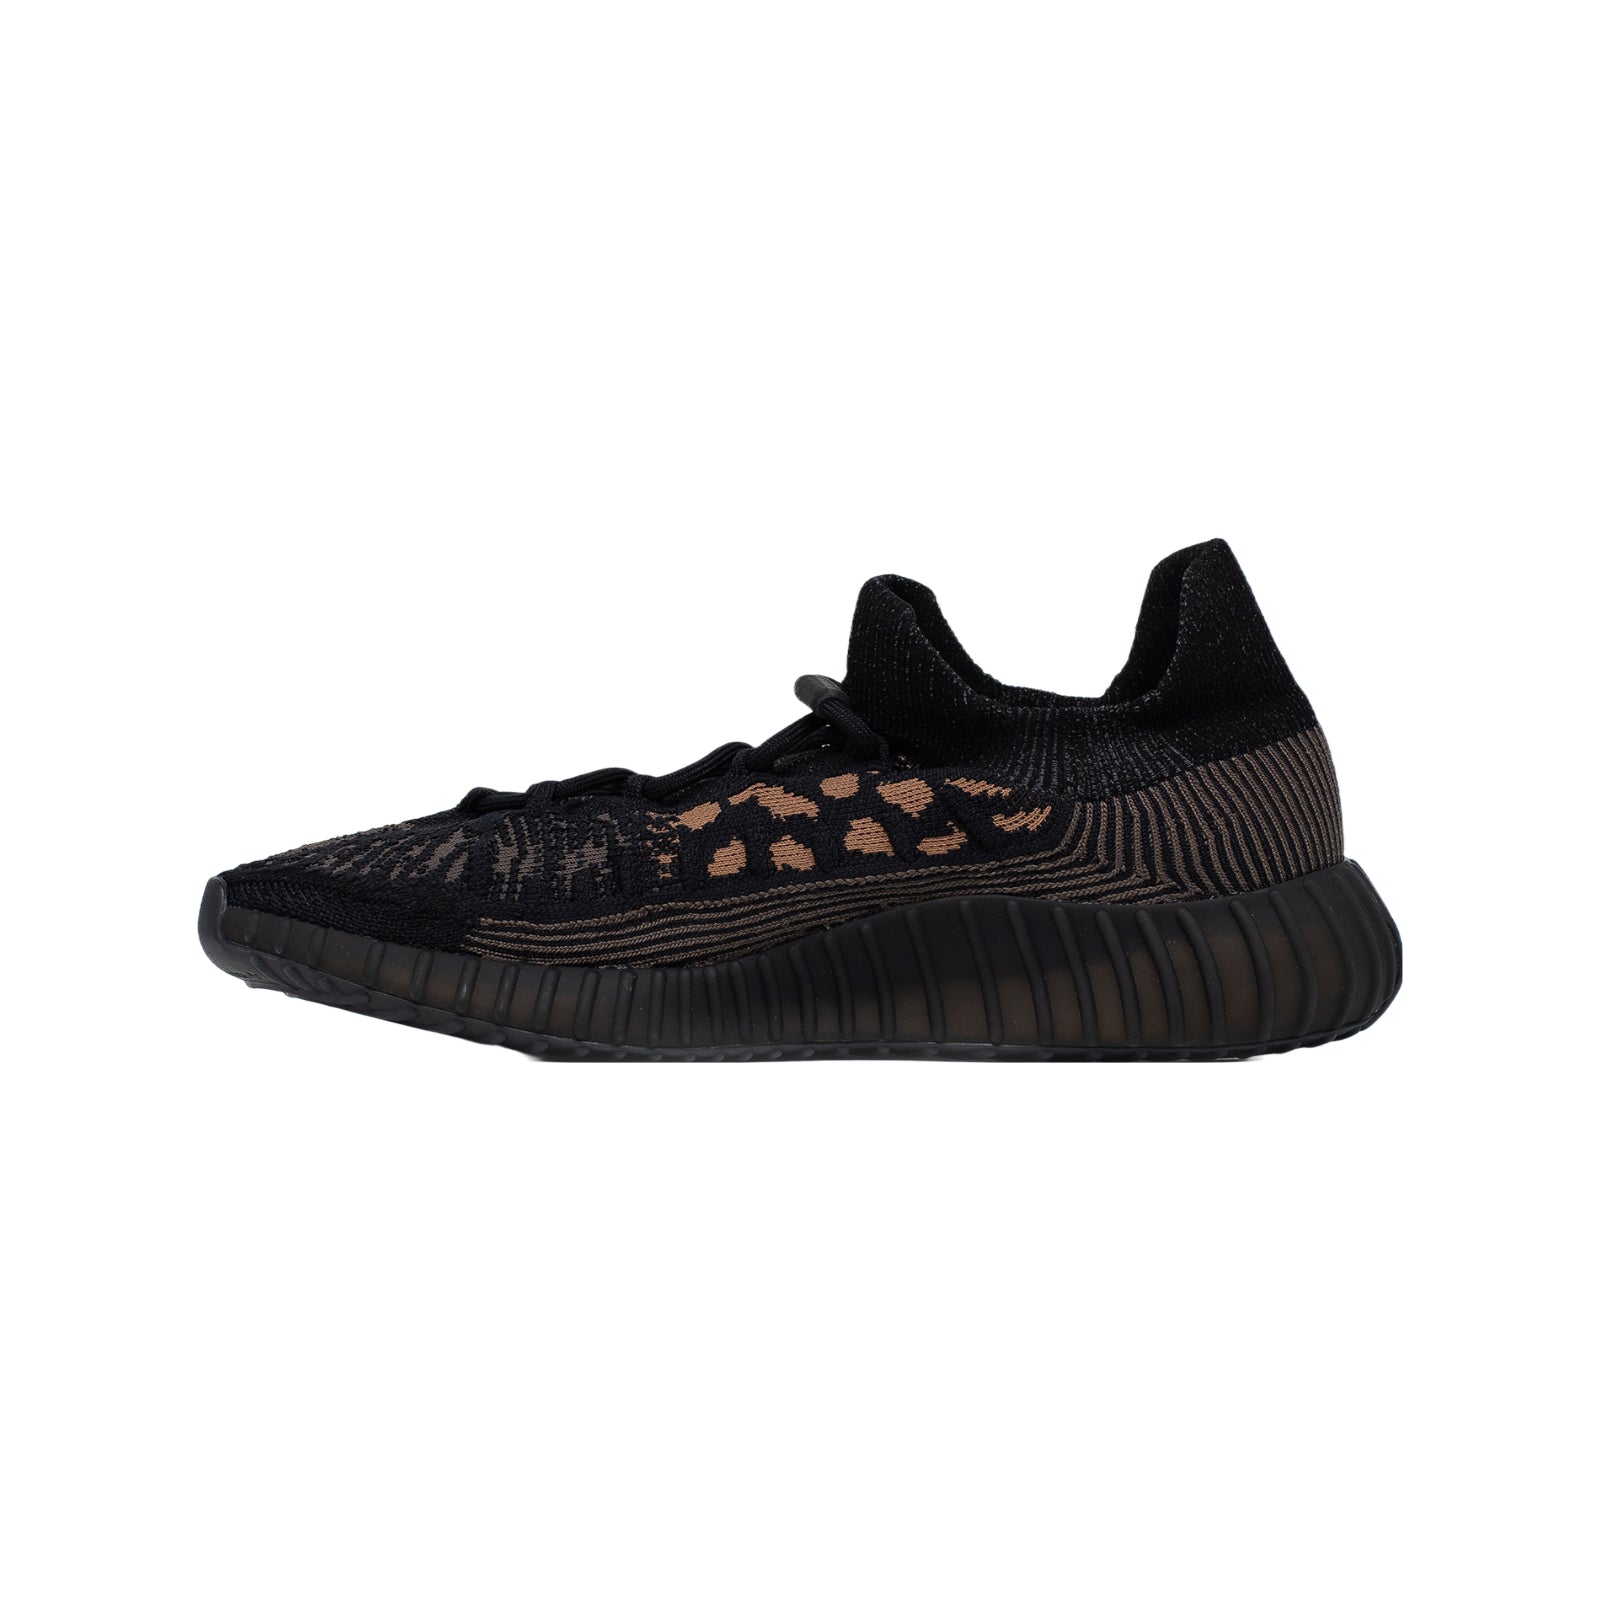 Yeezy Boost 350 V2, CMPCT Slate Carbon